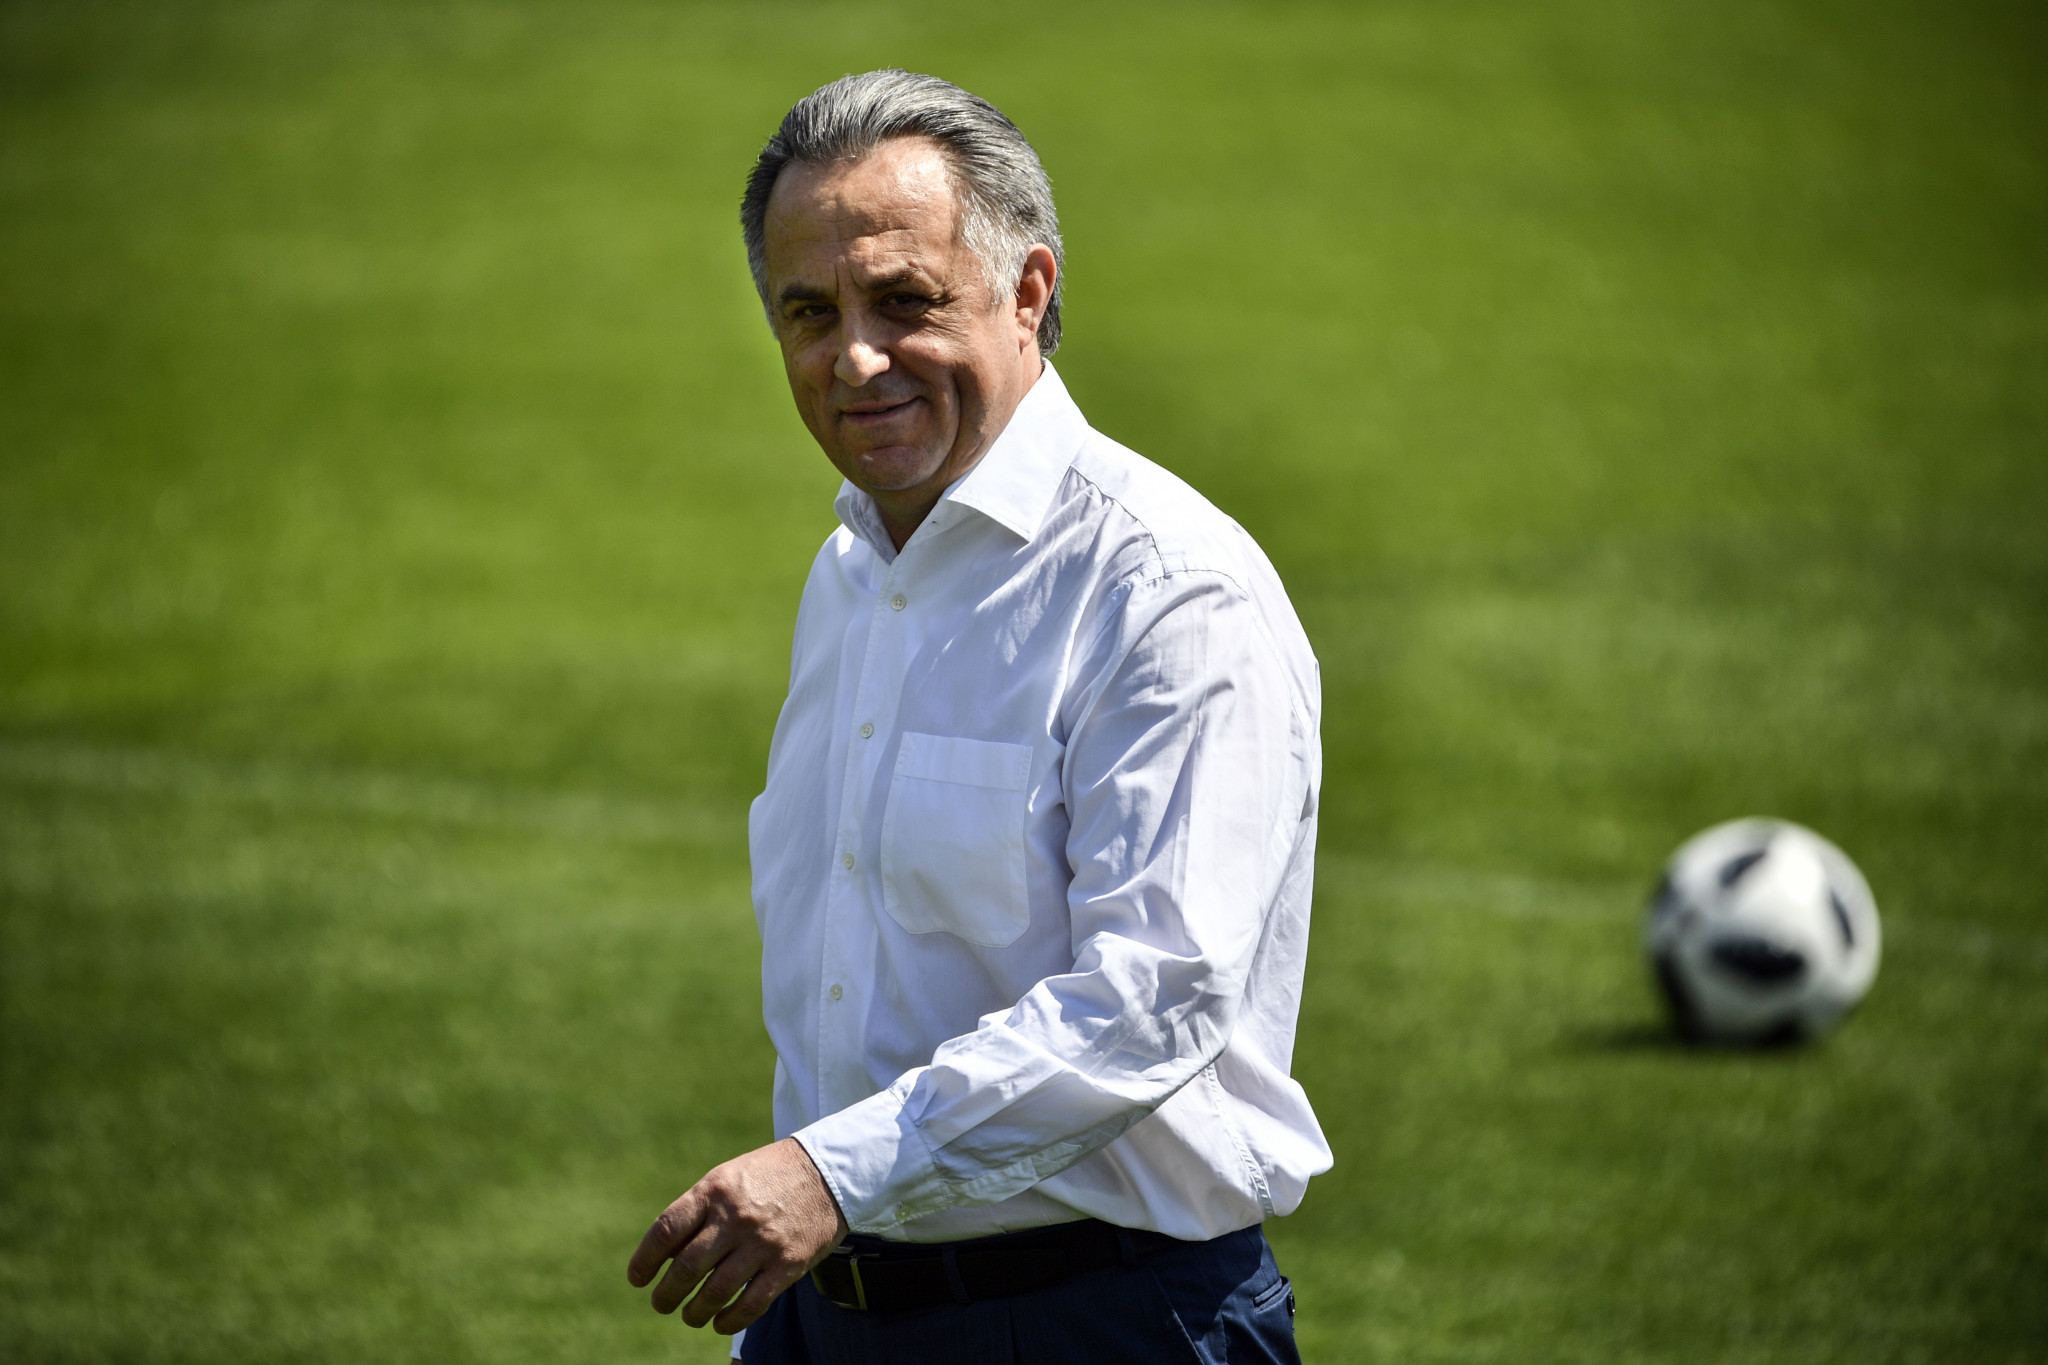 Mutko returns to position as President of Russian Football Union 